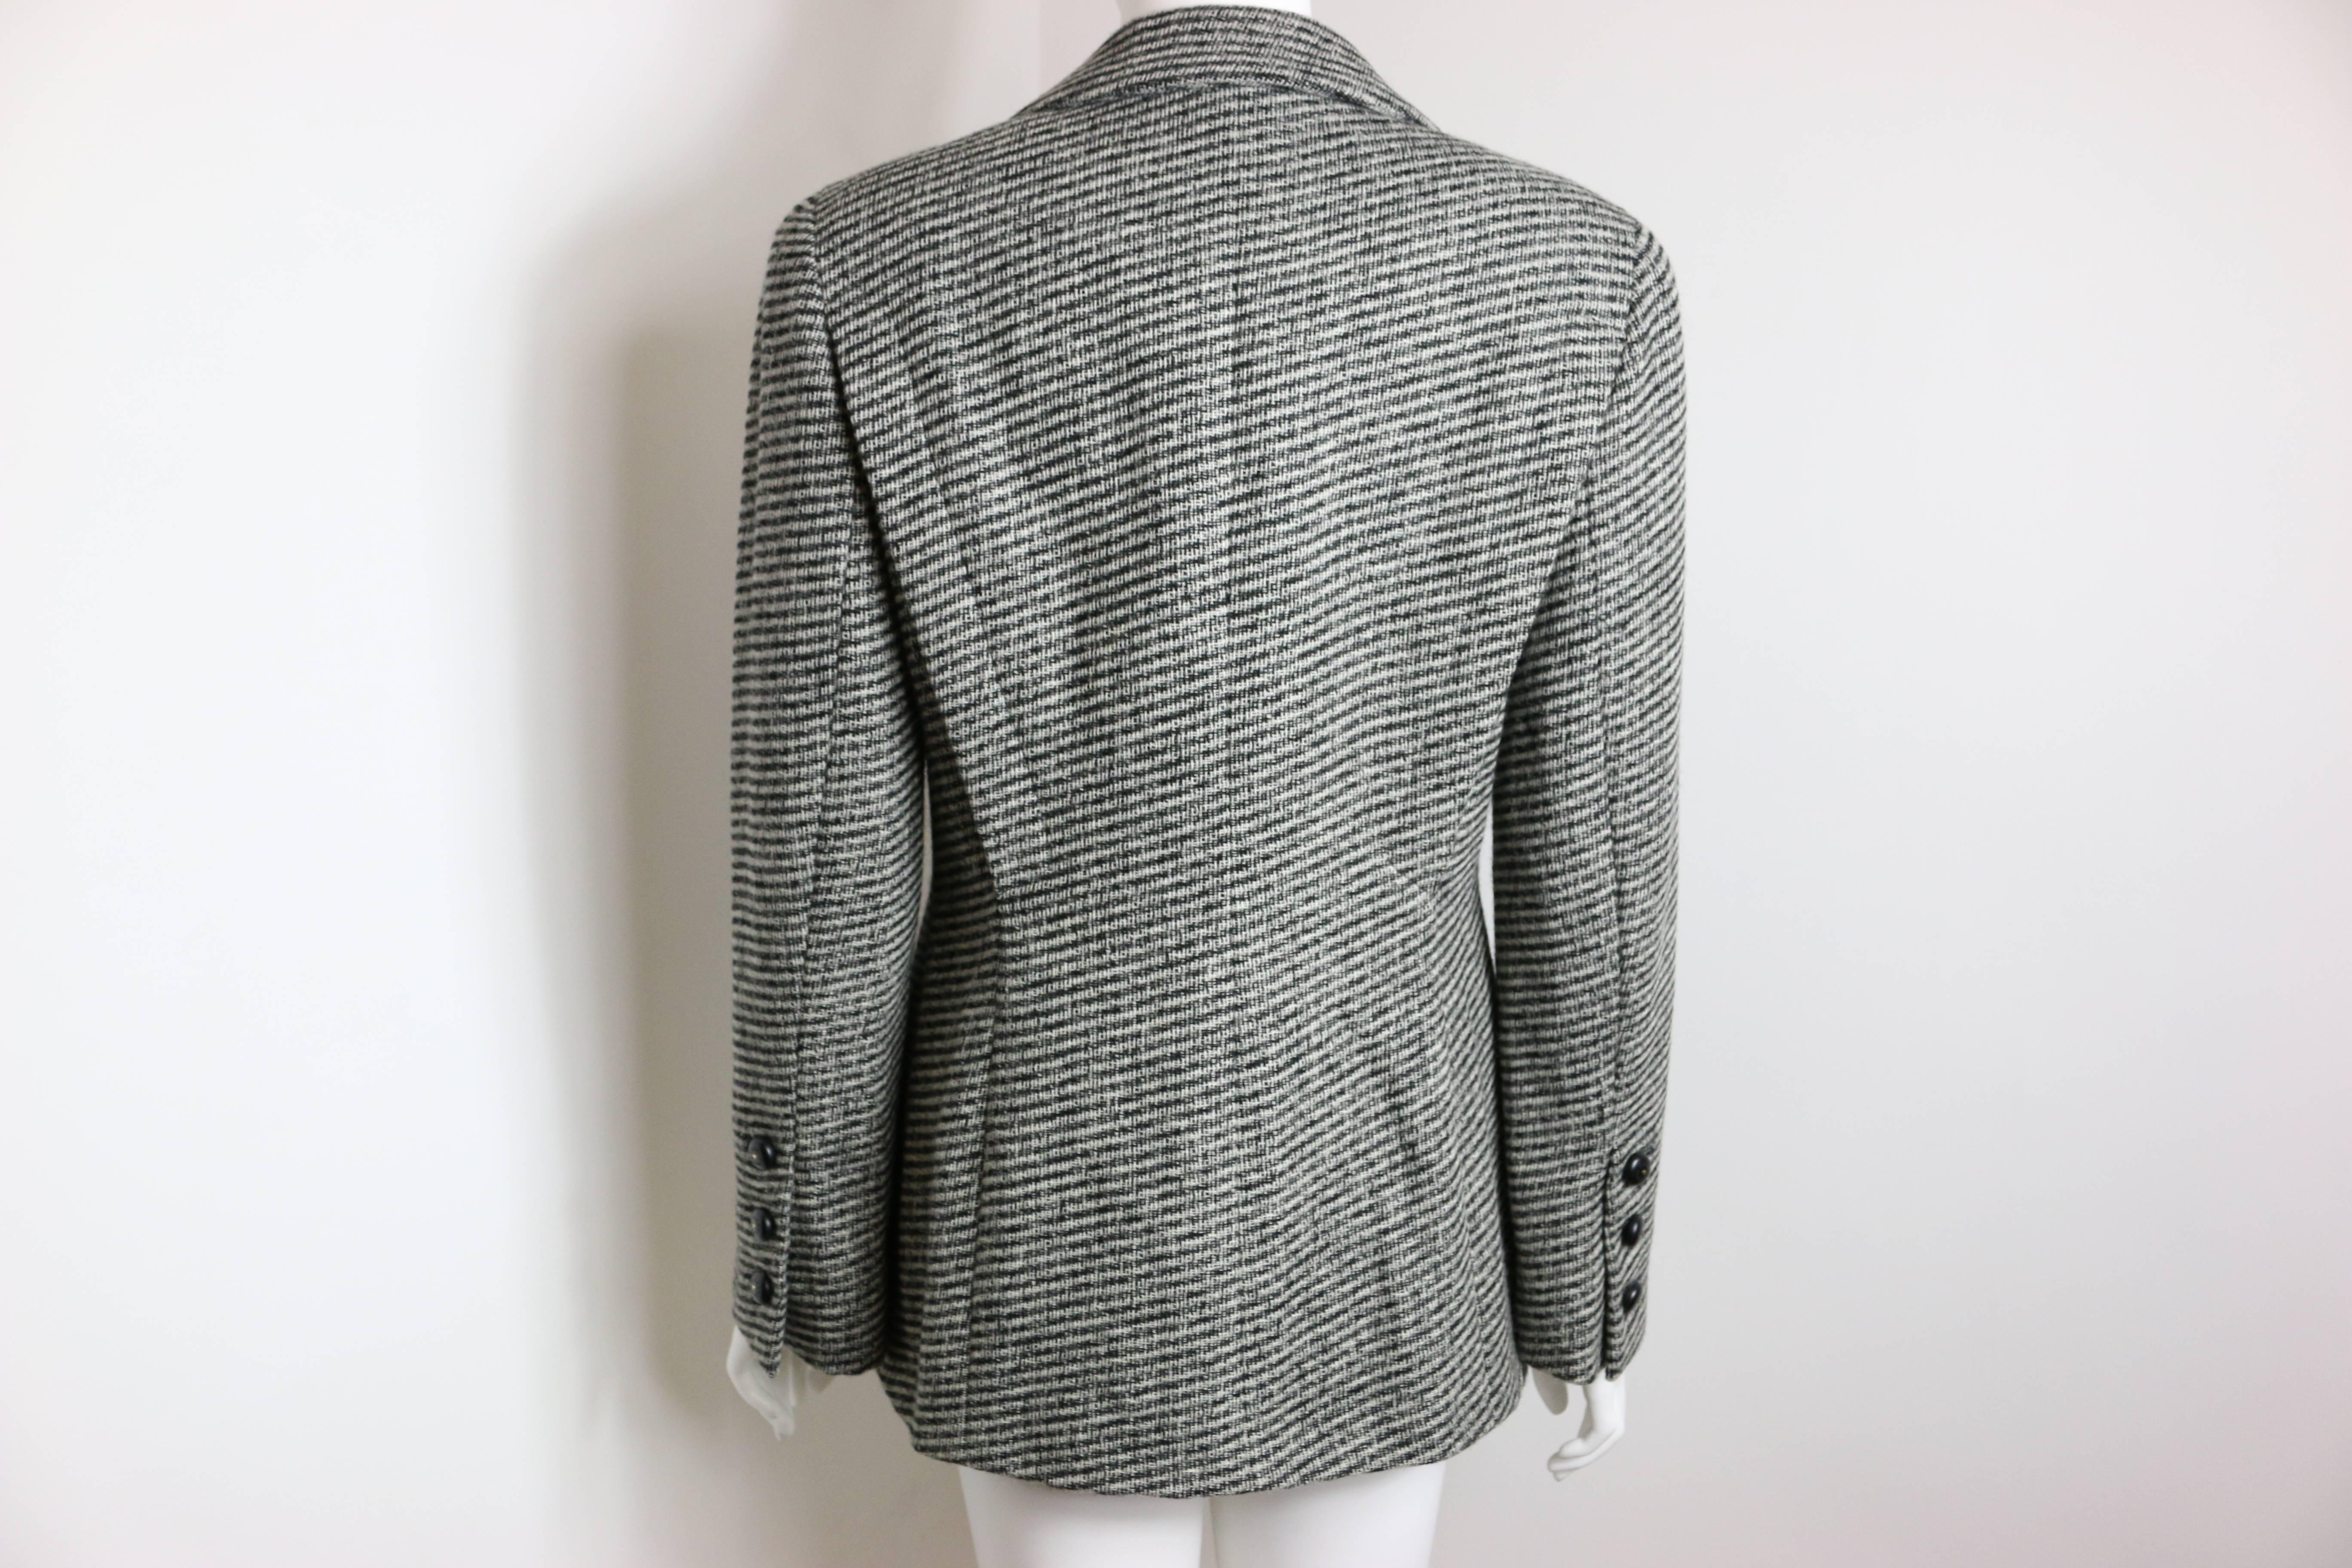 - Vintage Chanel classic black and white tweed from fall 1994 collection 

- 100% wool and silk lining .

-  Single breasted blazer with two front pockets. 

-  One front button and three buttons on each cuff. 

- Made in Italy. 

- Size 38

